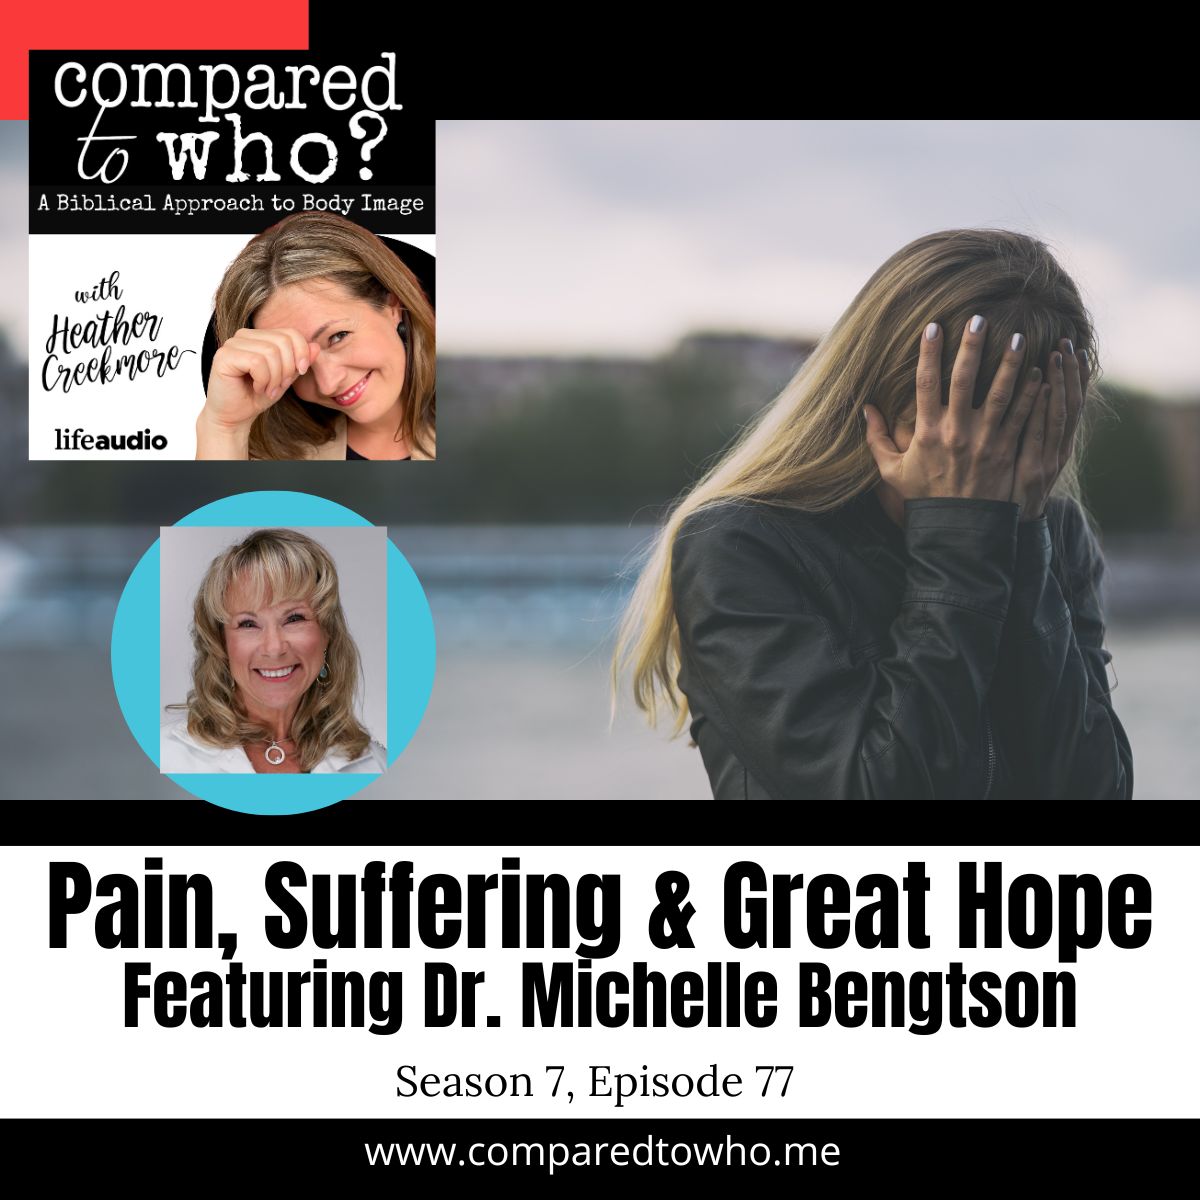 Finding Hope in Suffering & Pain Featuring Dr. Michelle Bengtson